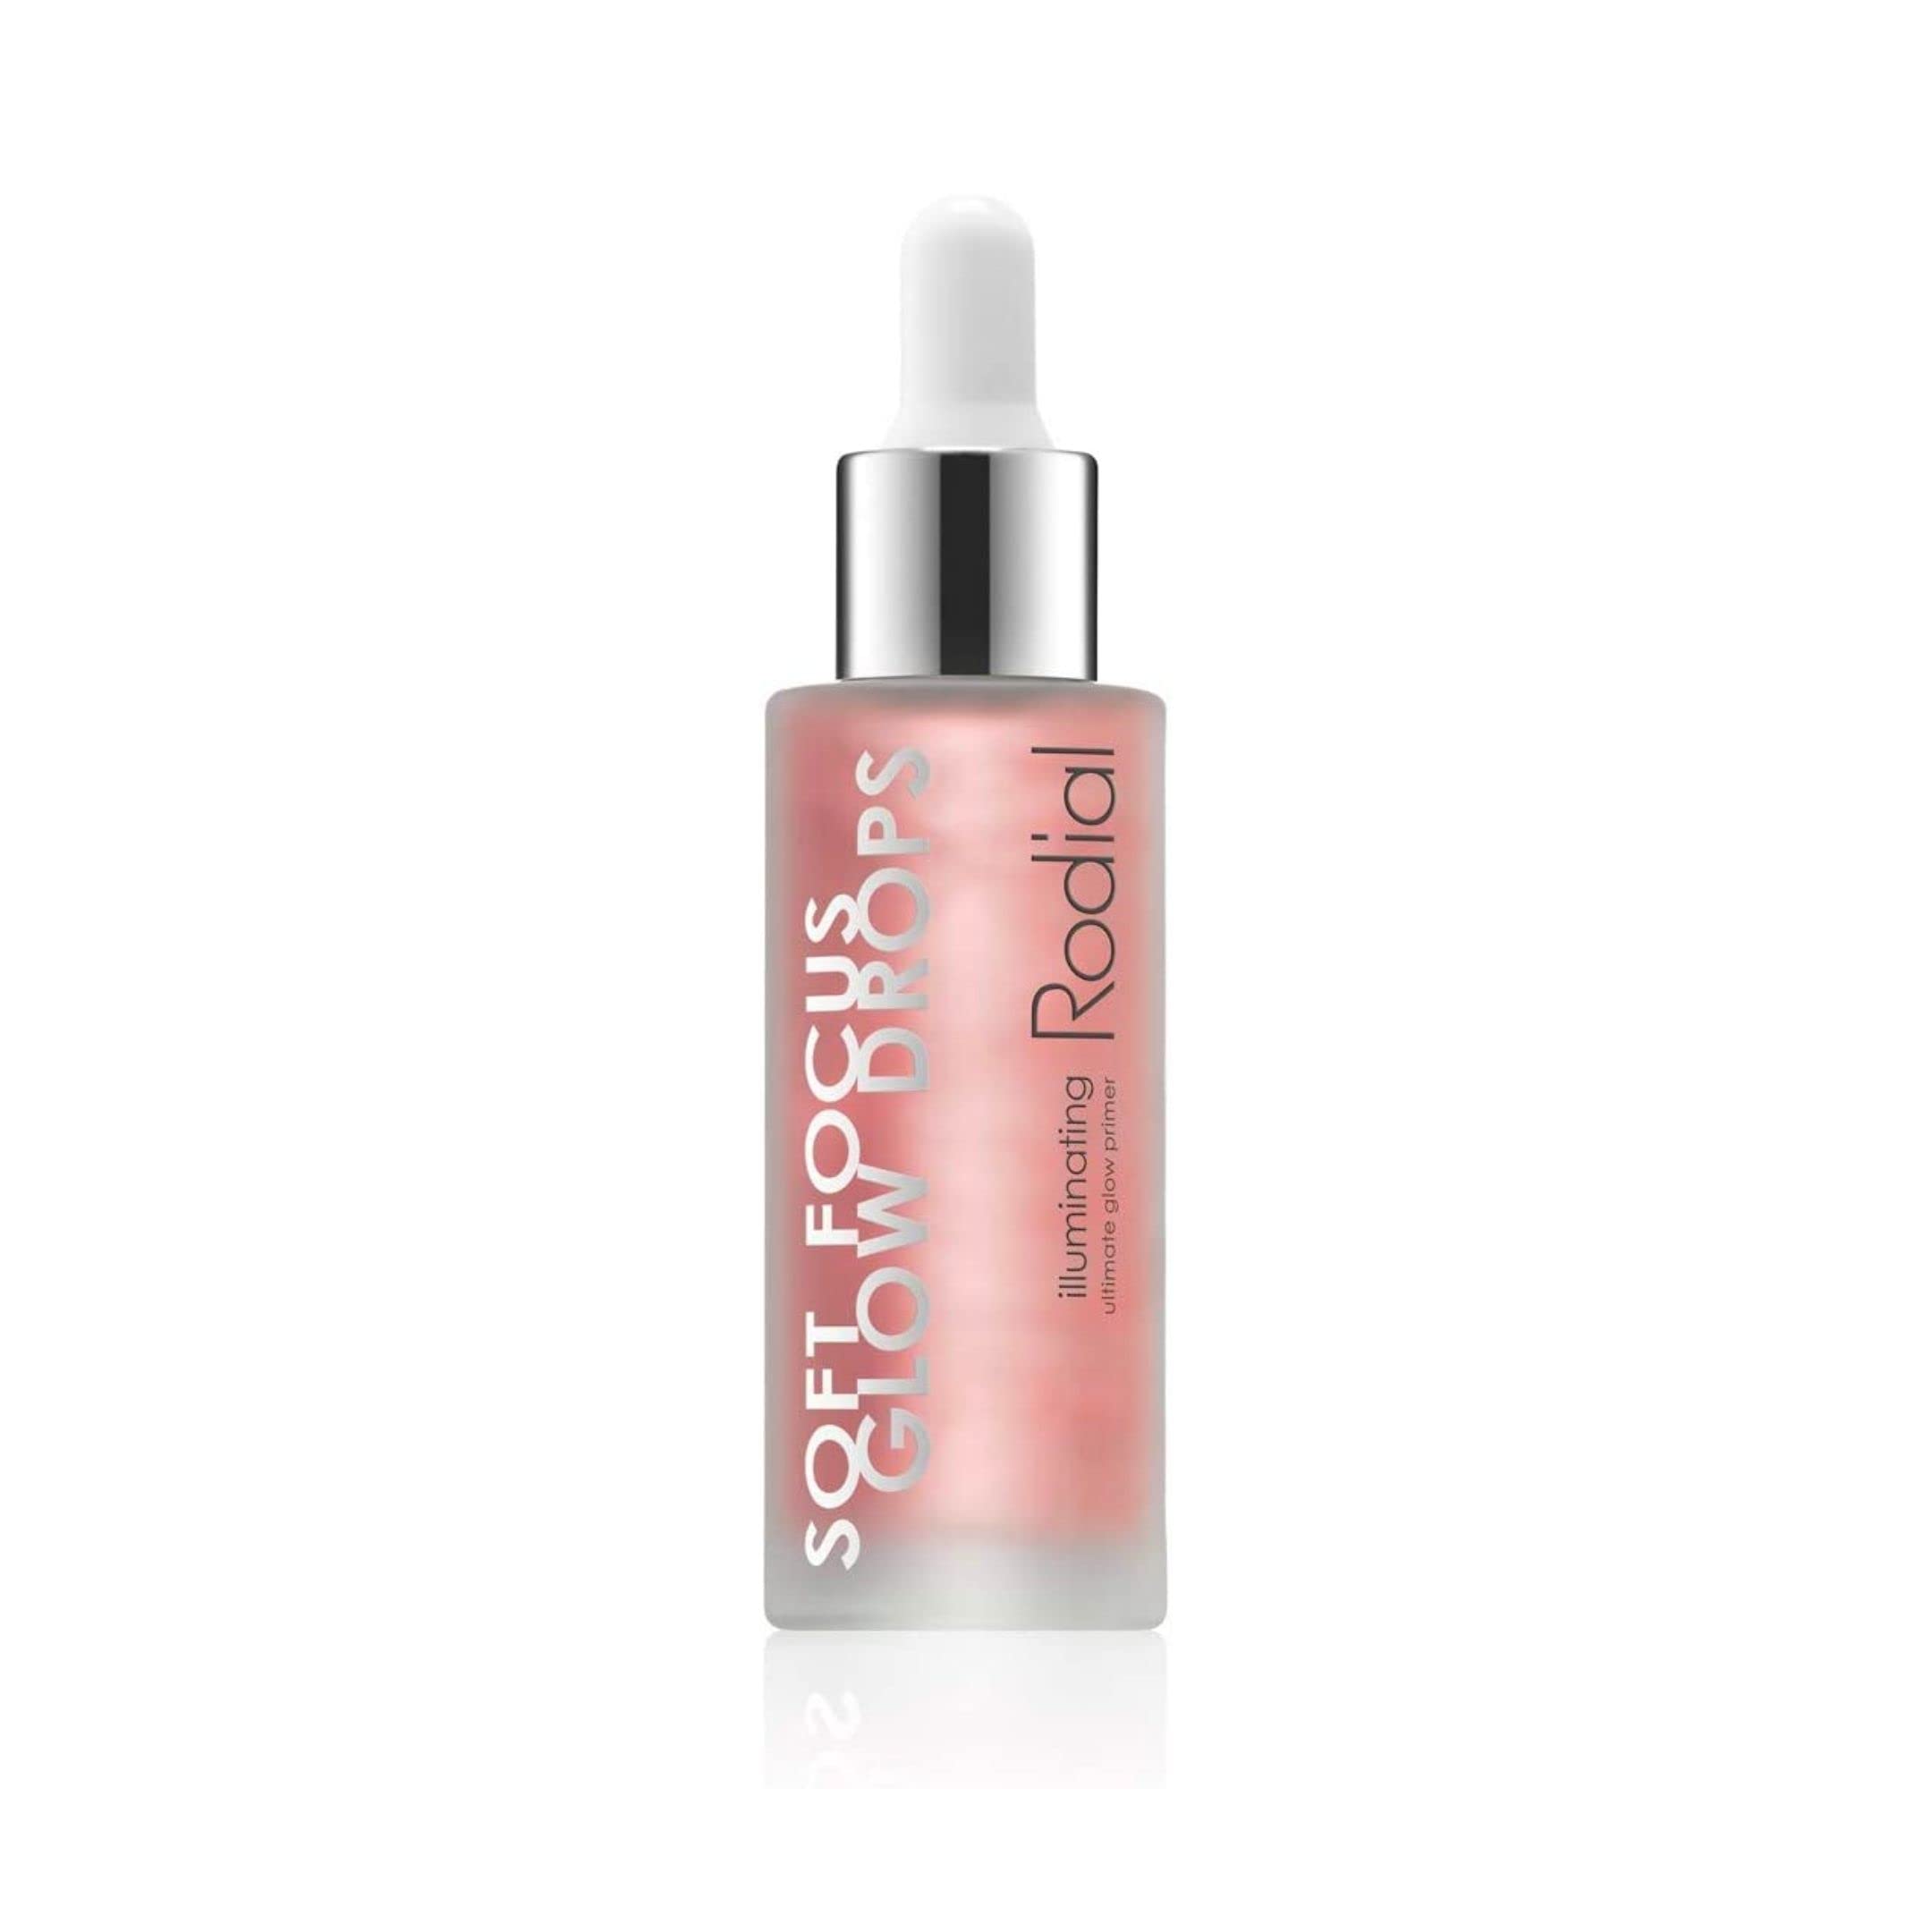 Soft Focus Glow Booster Drops, Illuminating Skin Serum with Glycerin and Antioxidants, Perfectioning and Smoothing Dewy Makeup Base, Weightless Formula